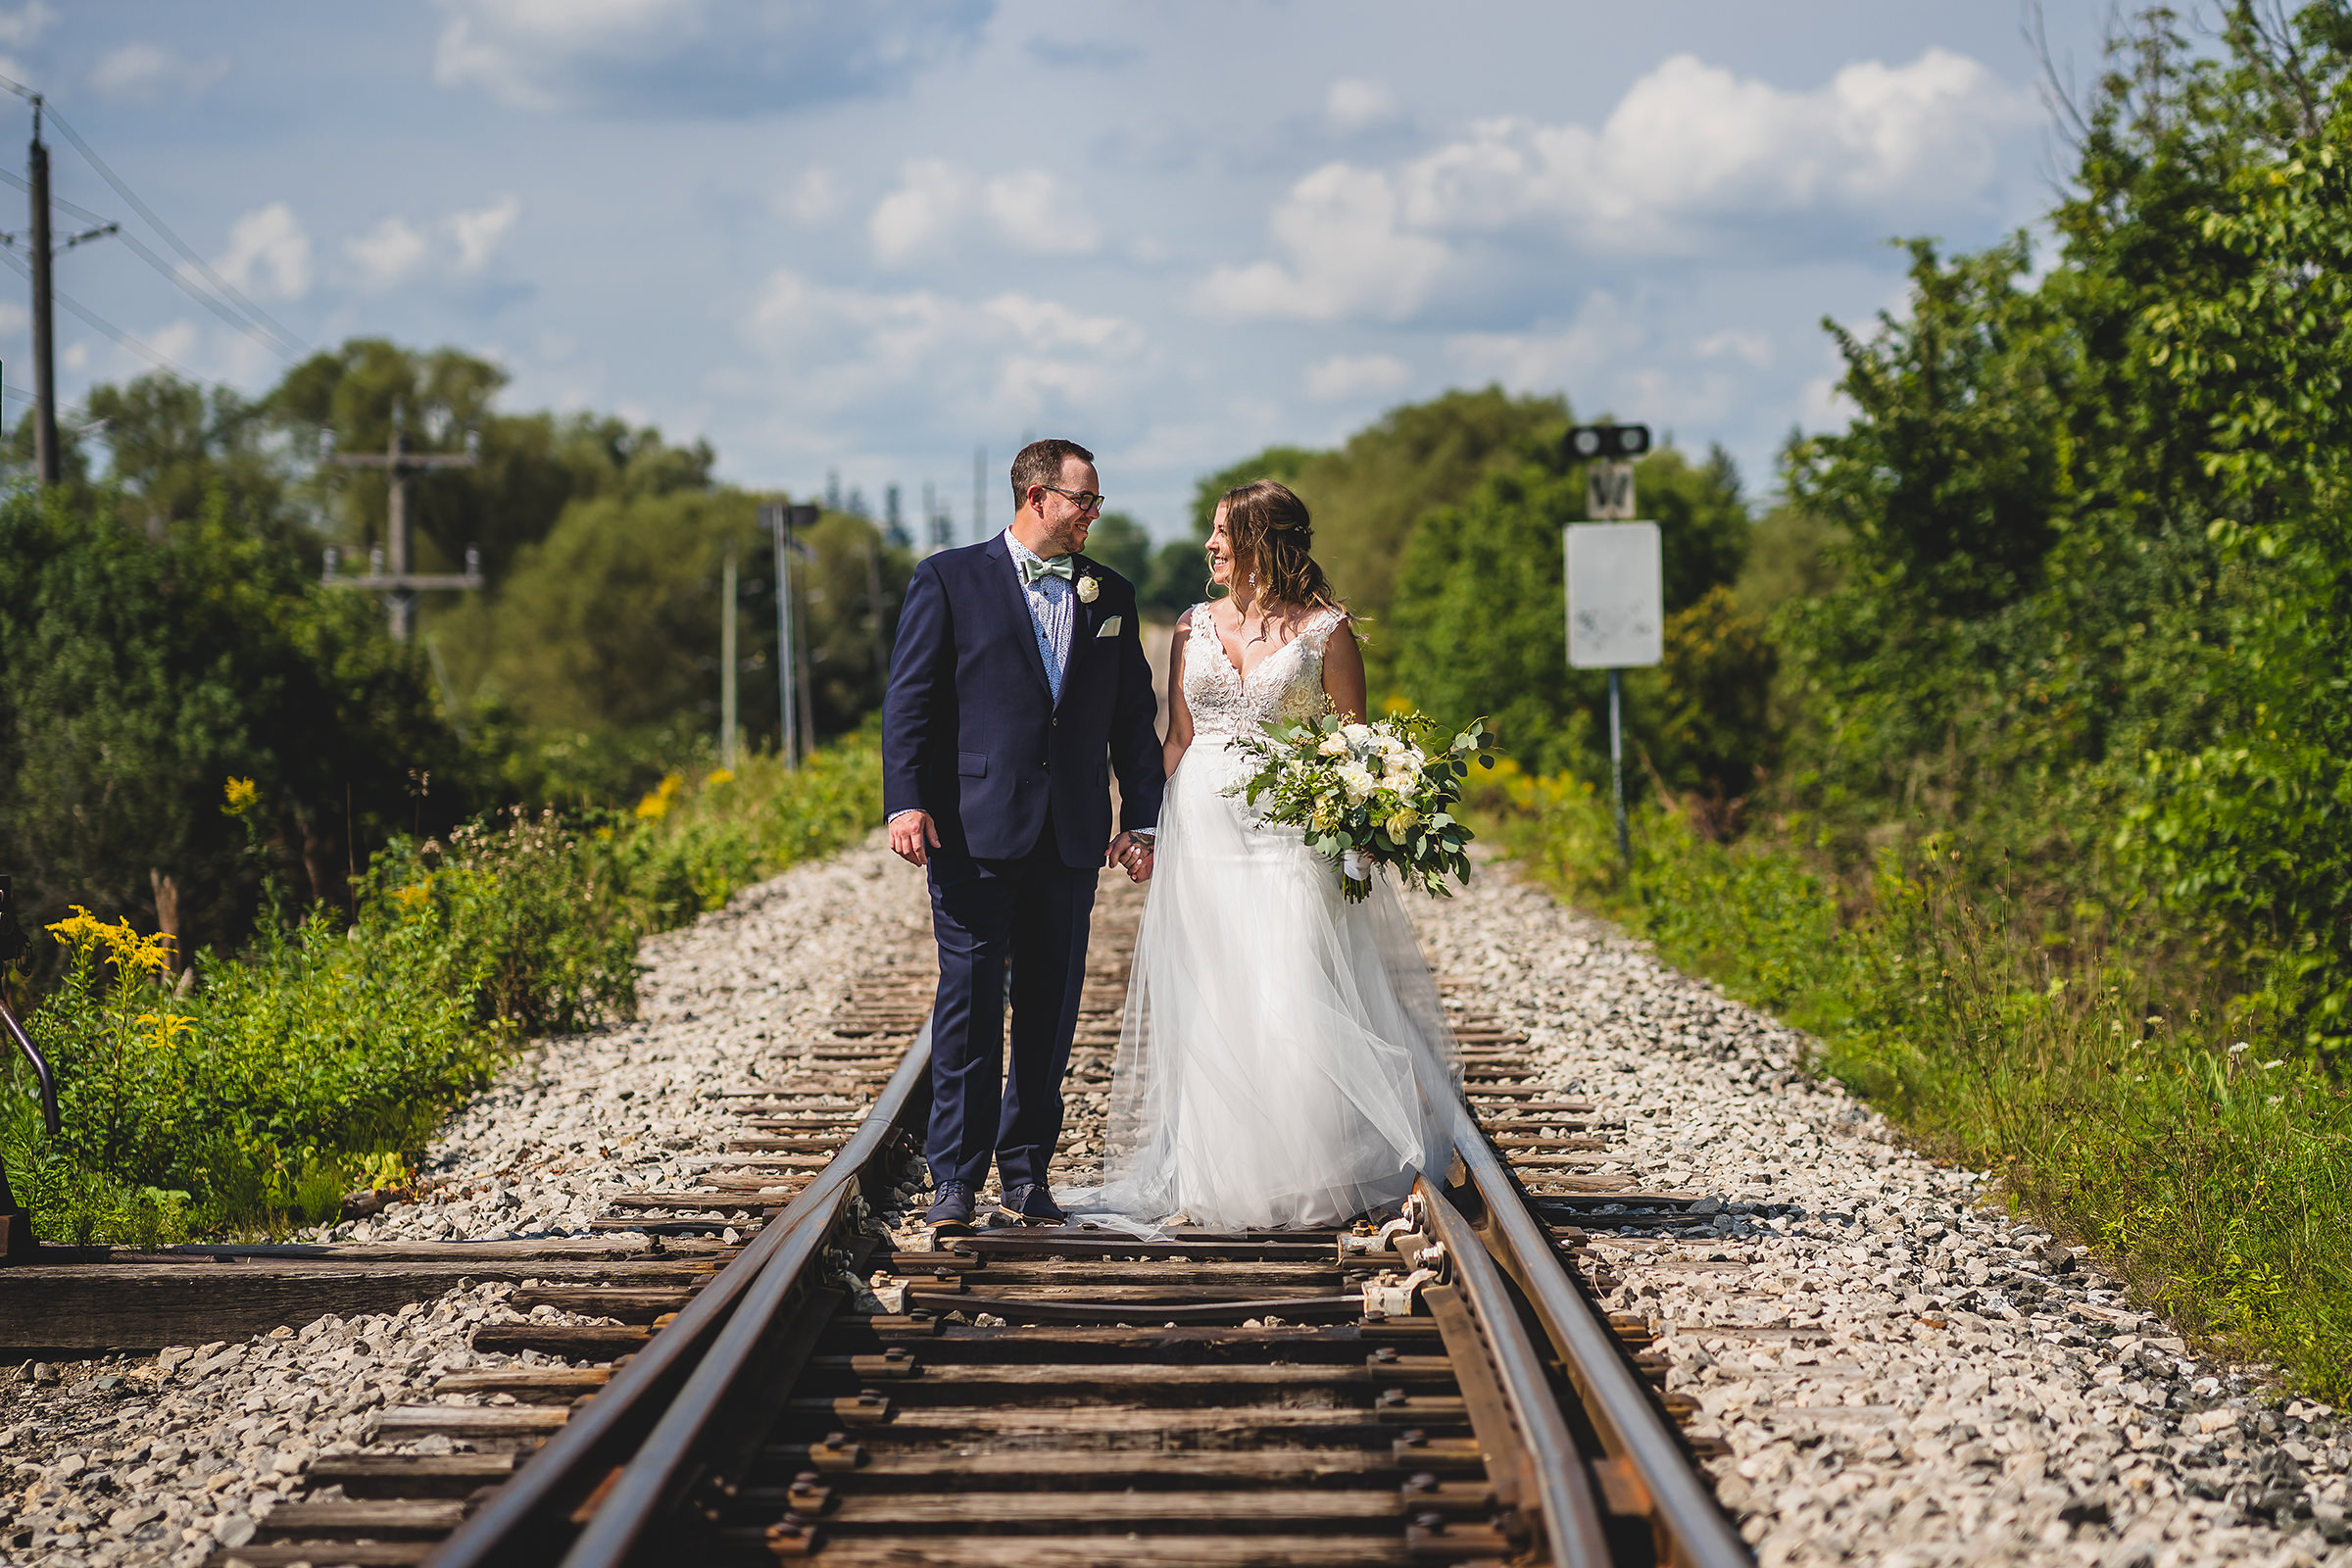 The Wedding Ring, Gary Evans Photography, Kitchener Waterloo Ontario Wedding Photographer, Cellar52, St.Jacobs Ontario event venue, Bride and Groom walking on train tracks